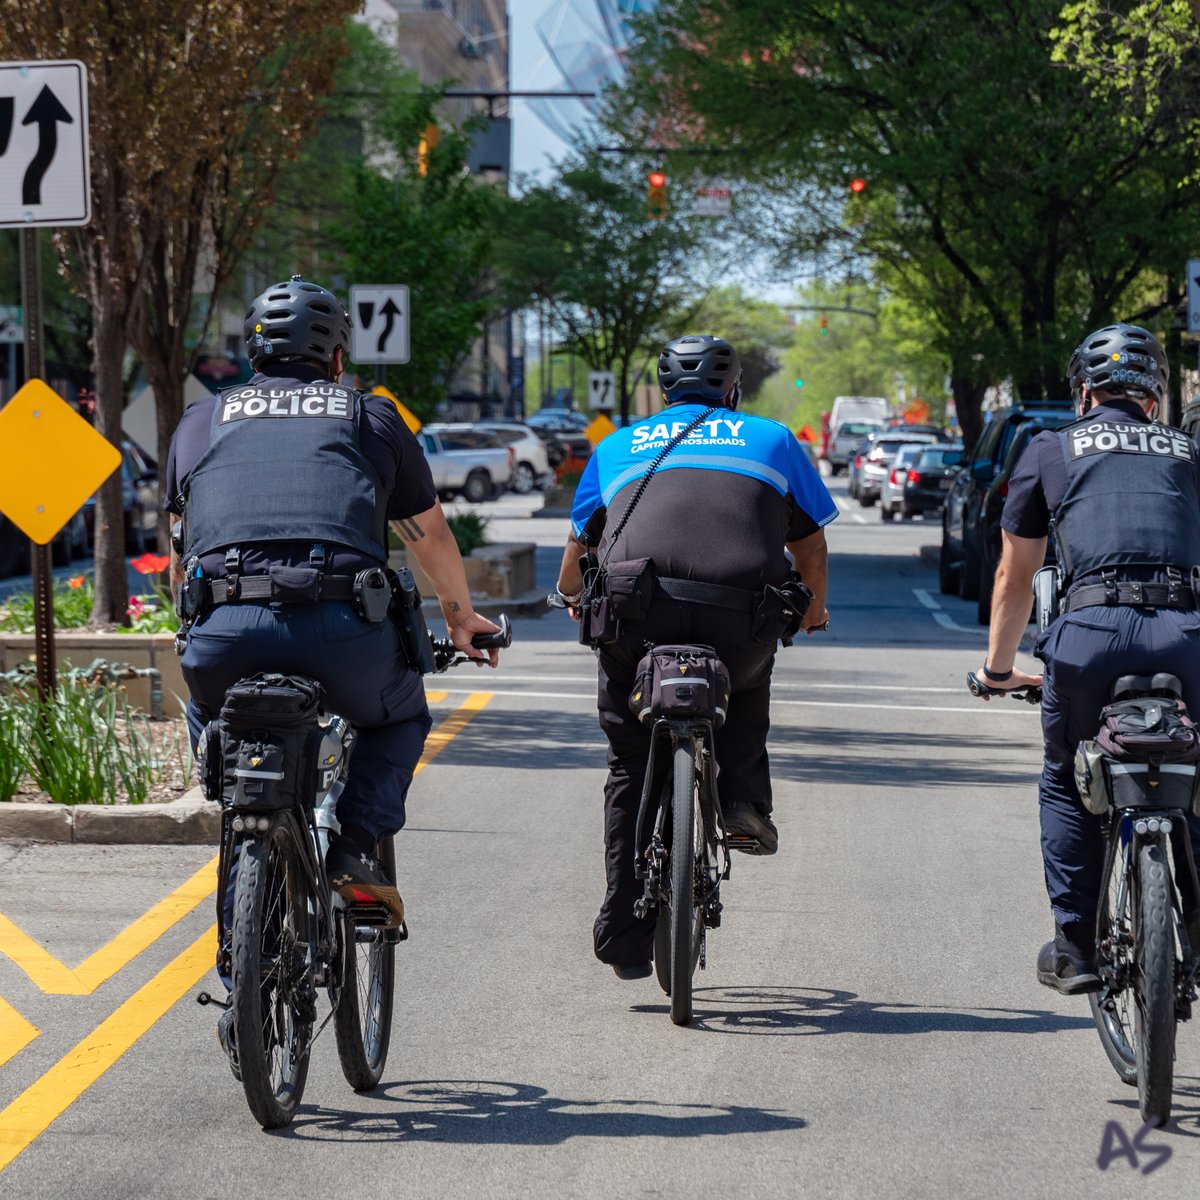 A BIG Thank You to CPD for helping with our downtown shoot. You guys rock! 🚵‍♂️💕☺💕🚵‍♂️ #downtown #streetscene